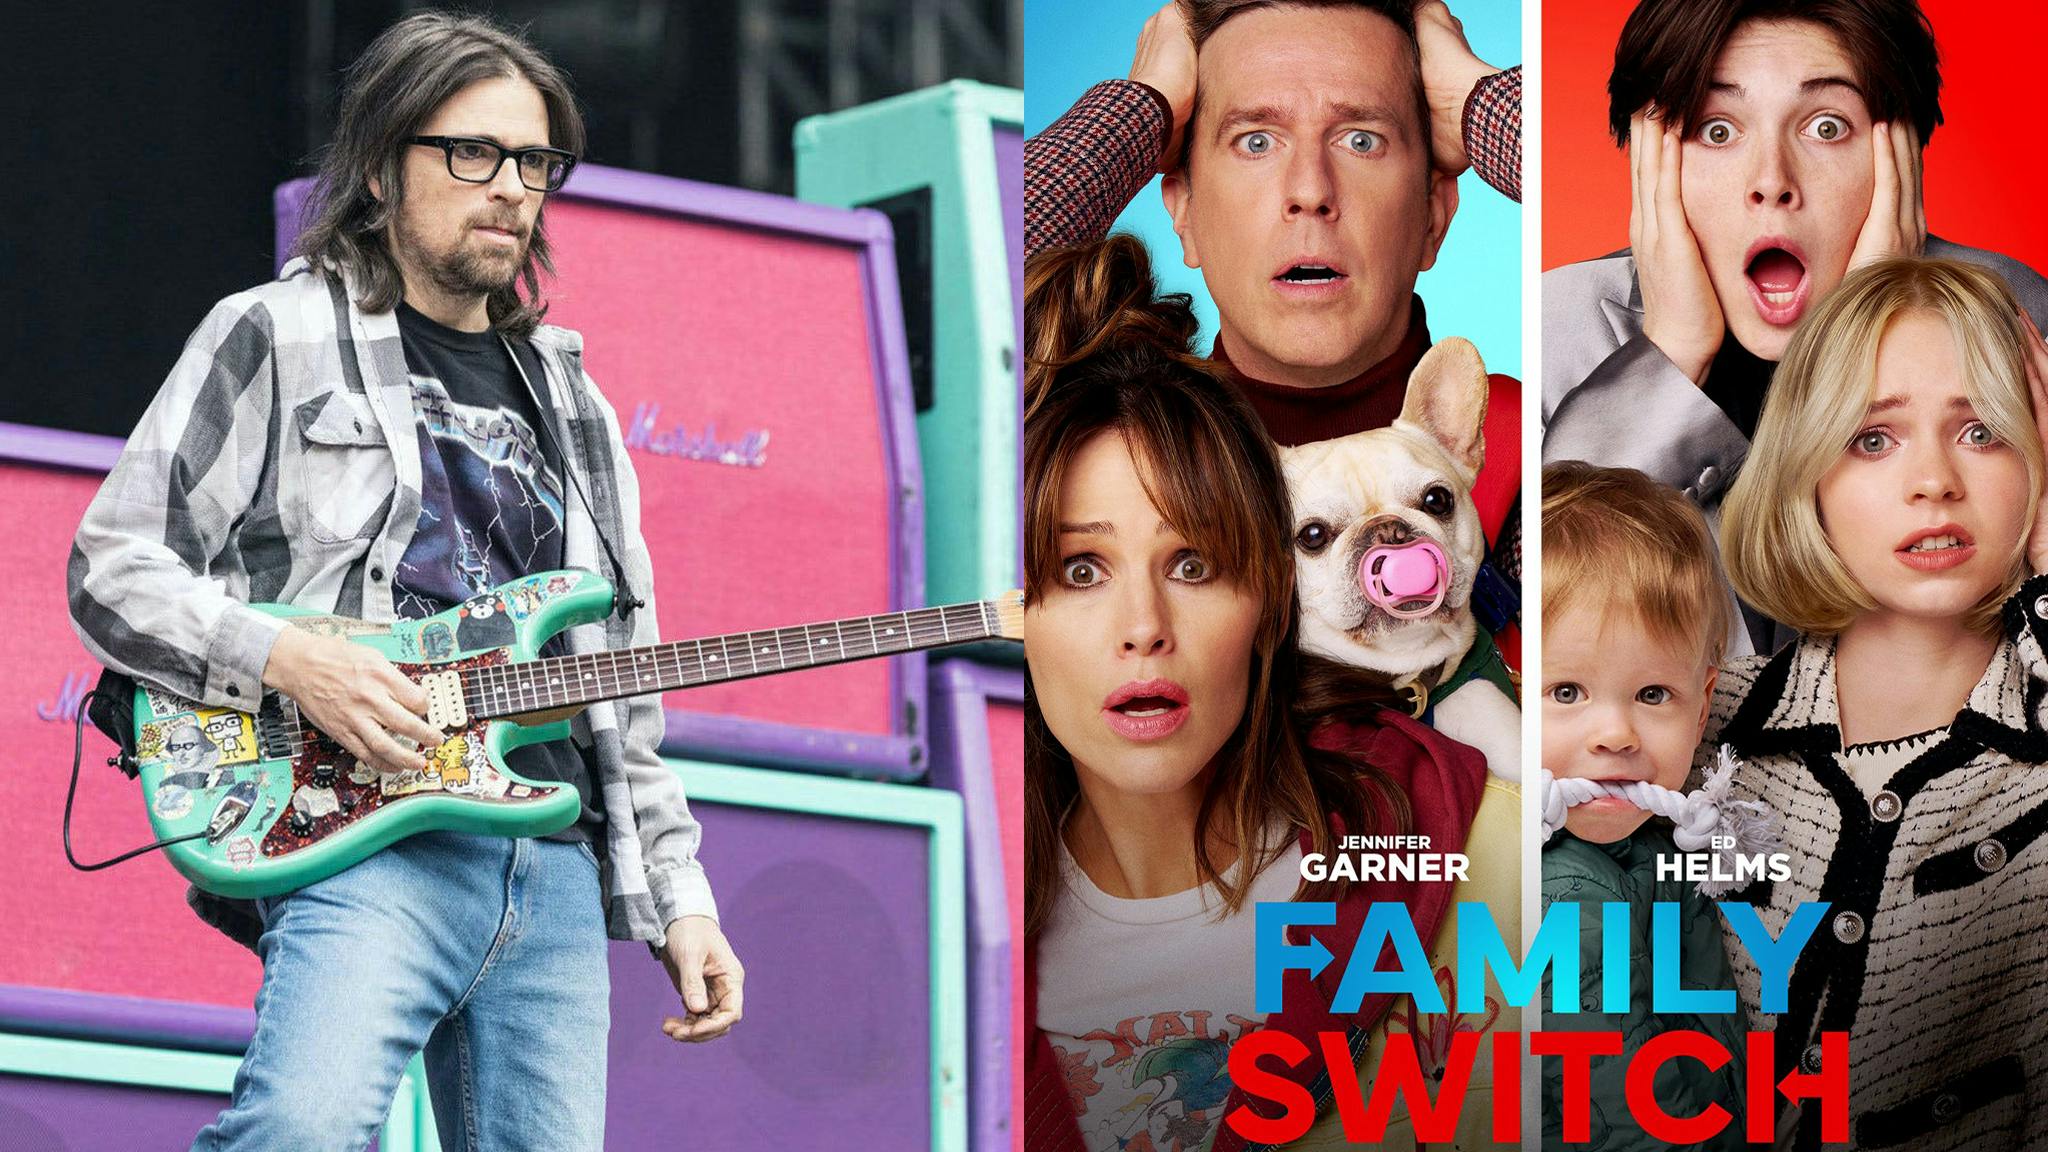 Weezer appear in Netflix’s new Christmas film, Family Switch